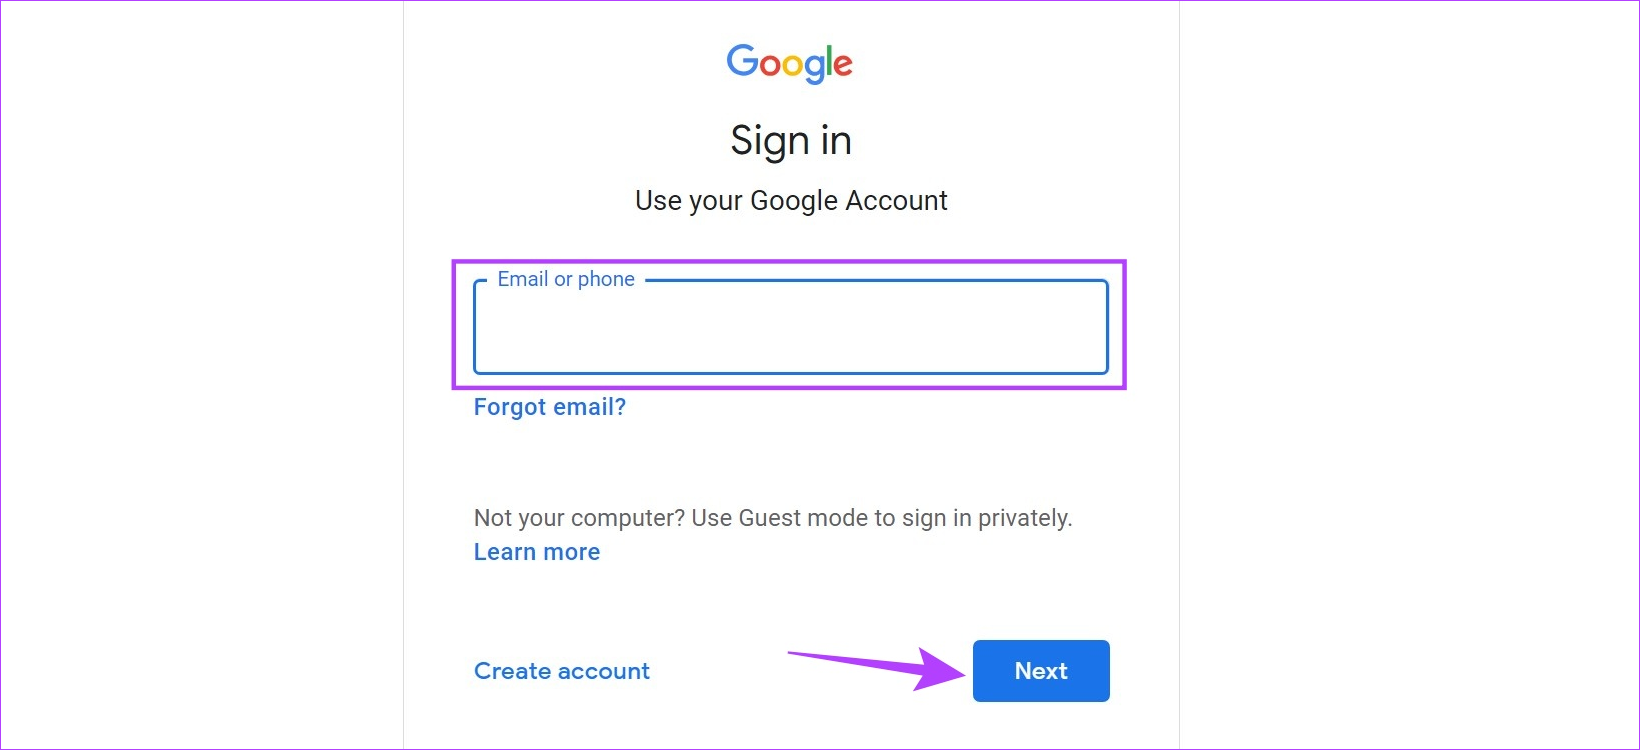 Enter the email ID and click on Next